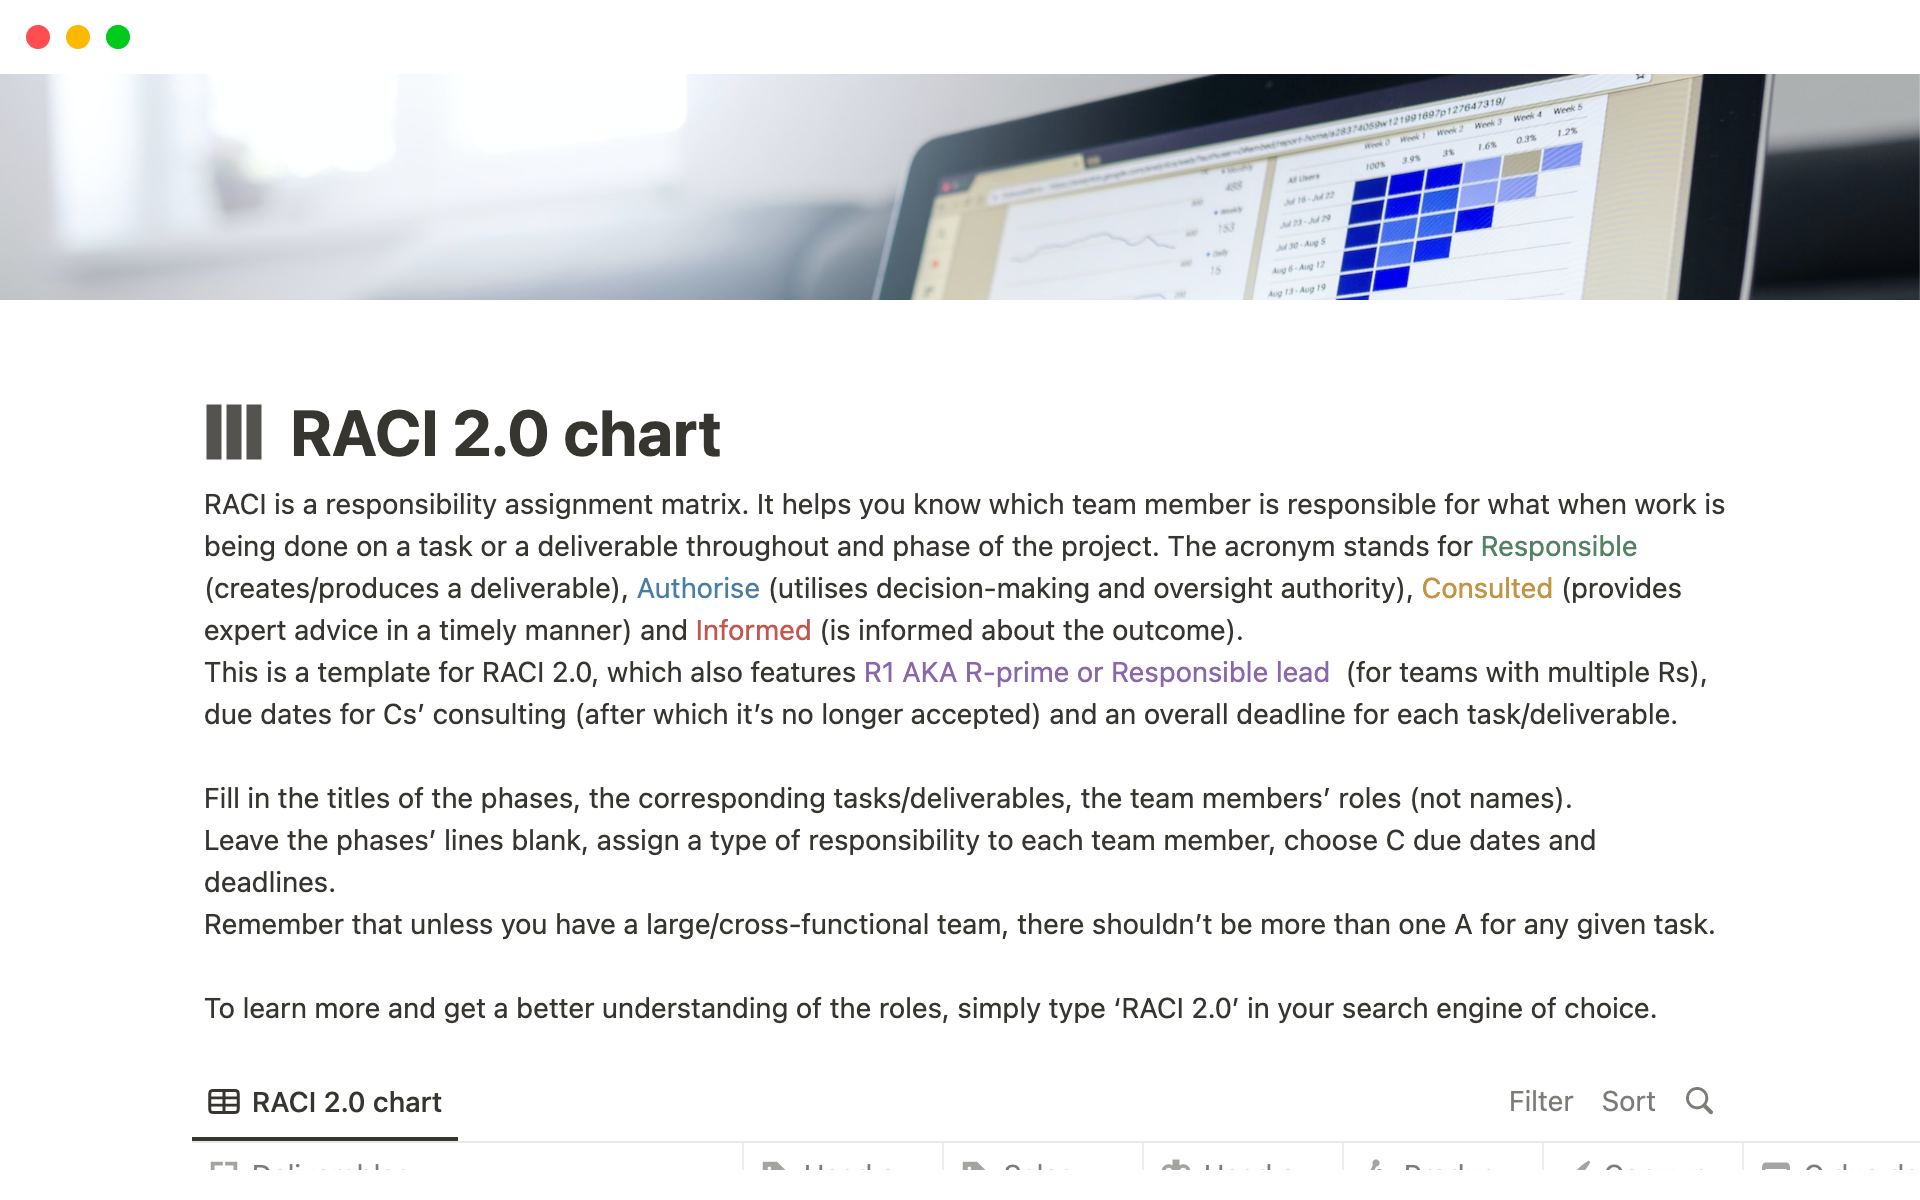 Allows you to use a simple customisable RACI 2.0 chart inside Notion, assign responsibility to team members and track it effectively.